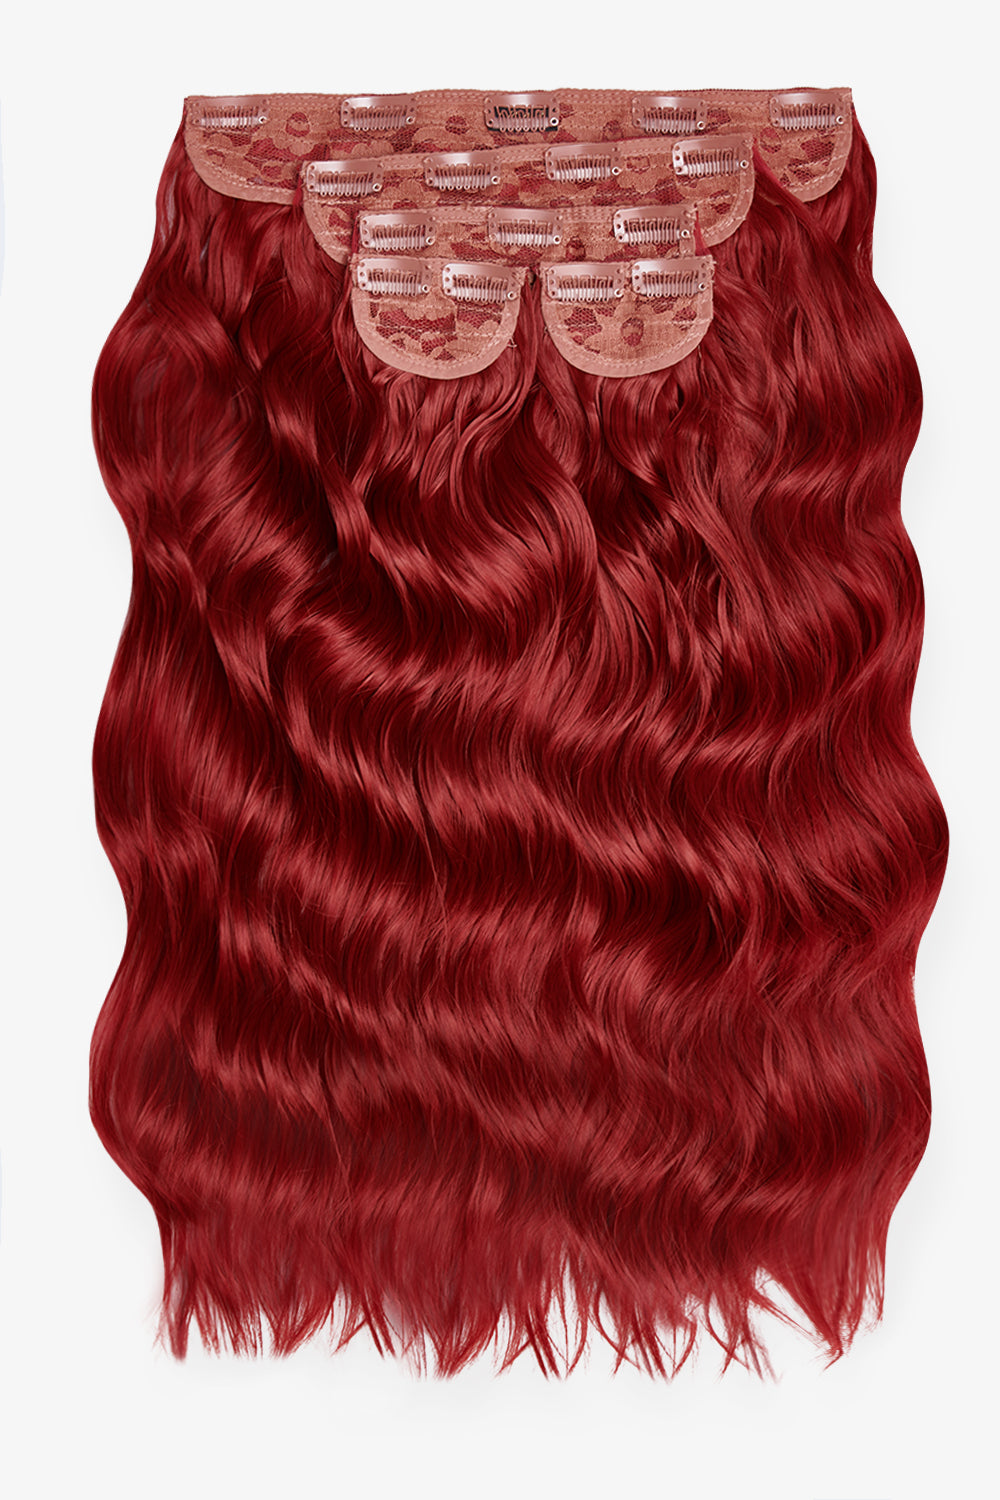 Super Thick 22’’ 5 Piece Brushed Out Wave Clip In Hair Extensions - Ruby Red